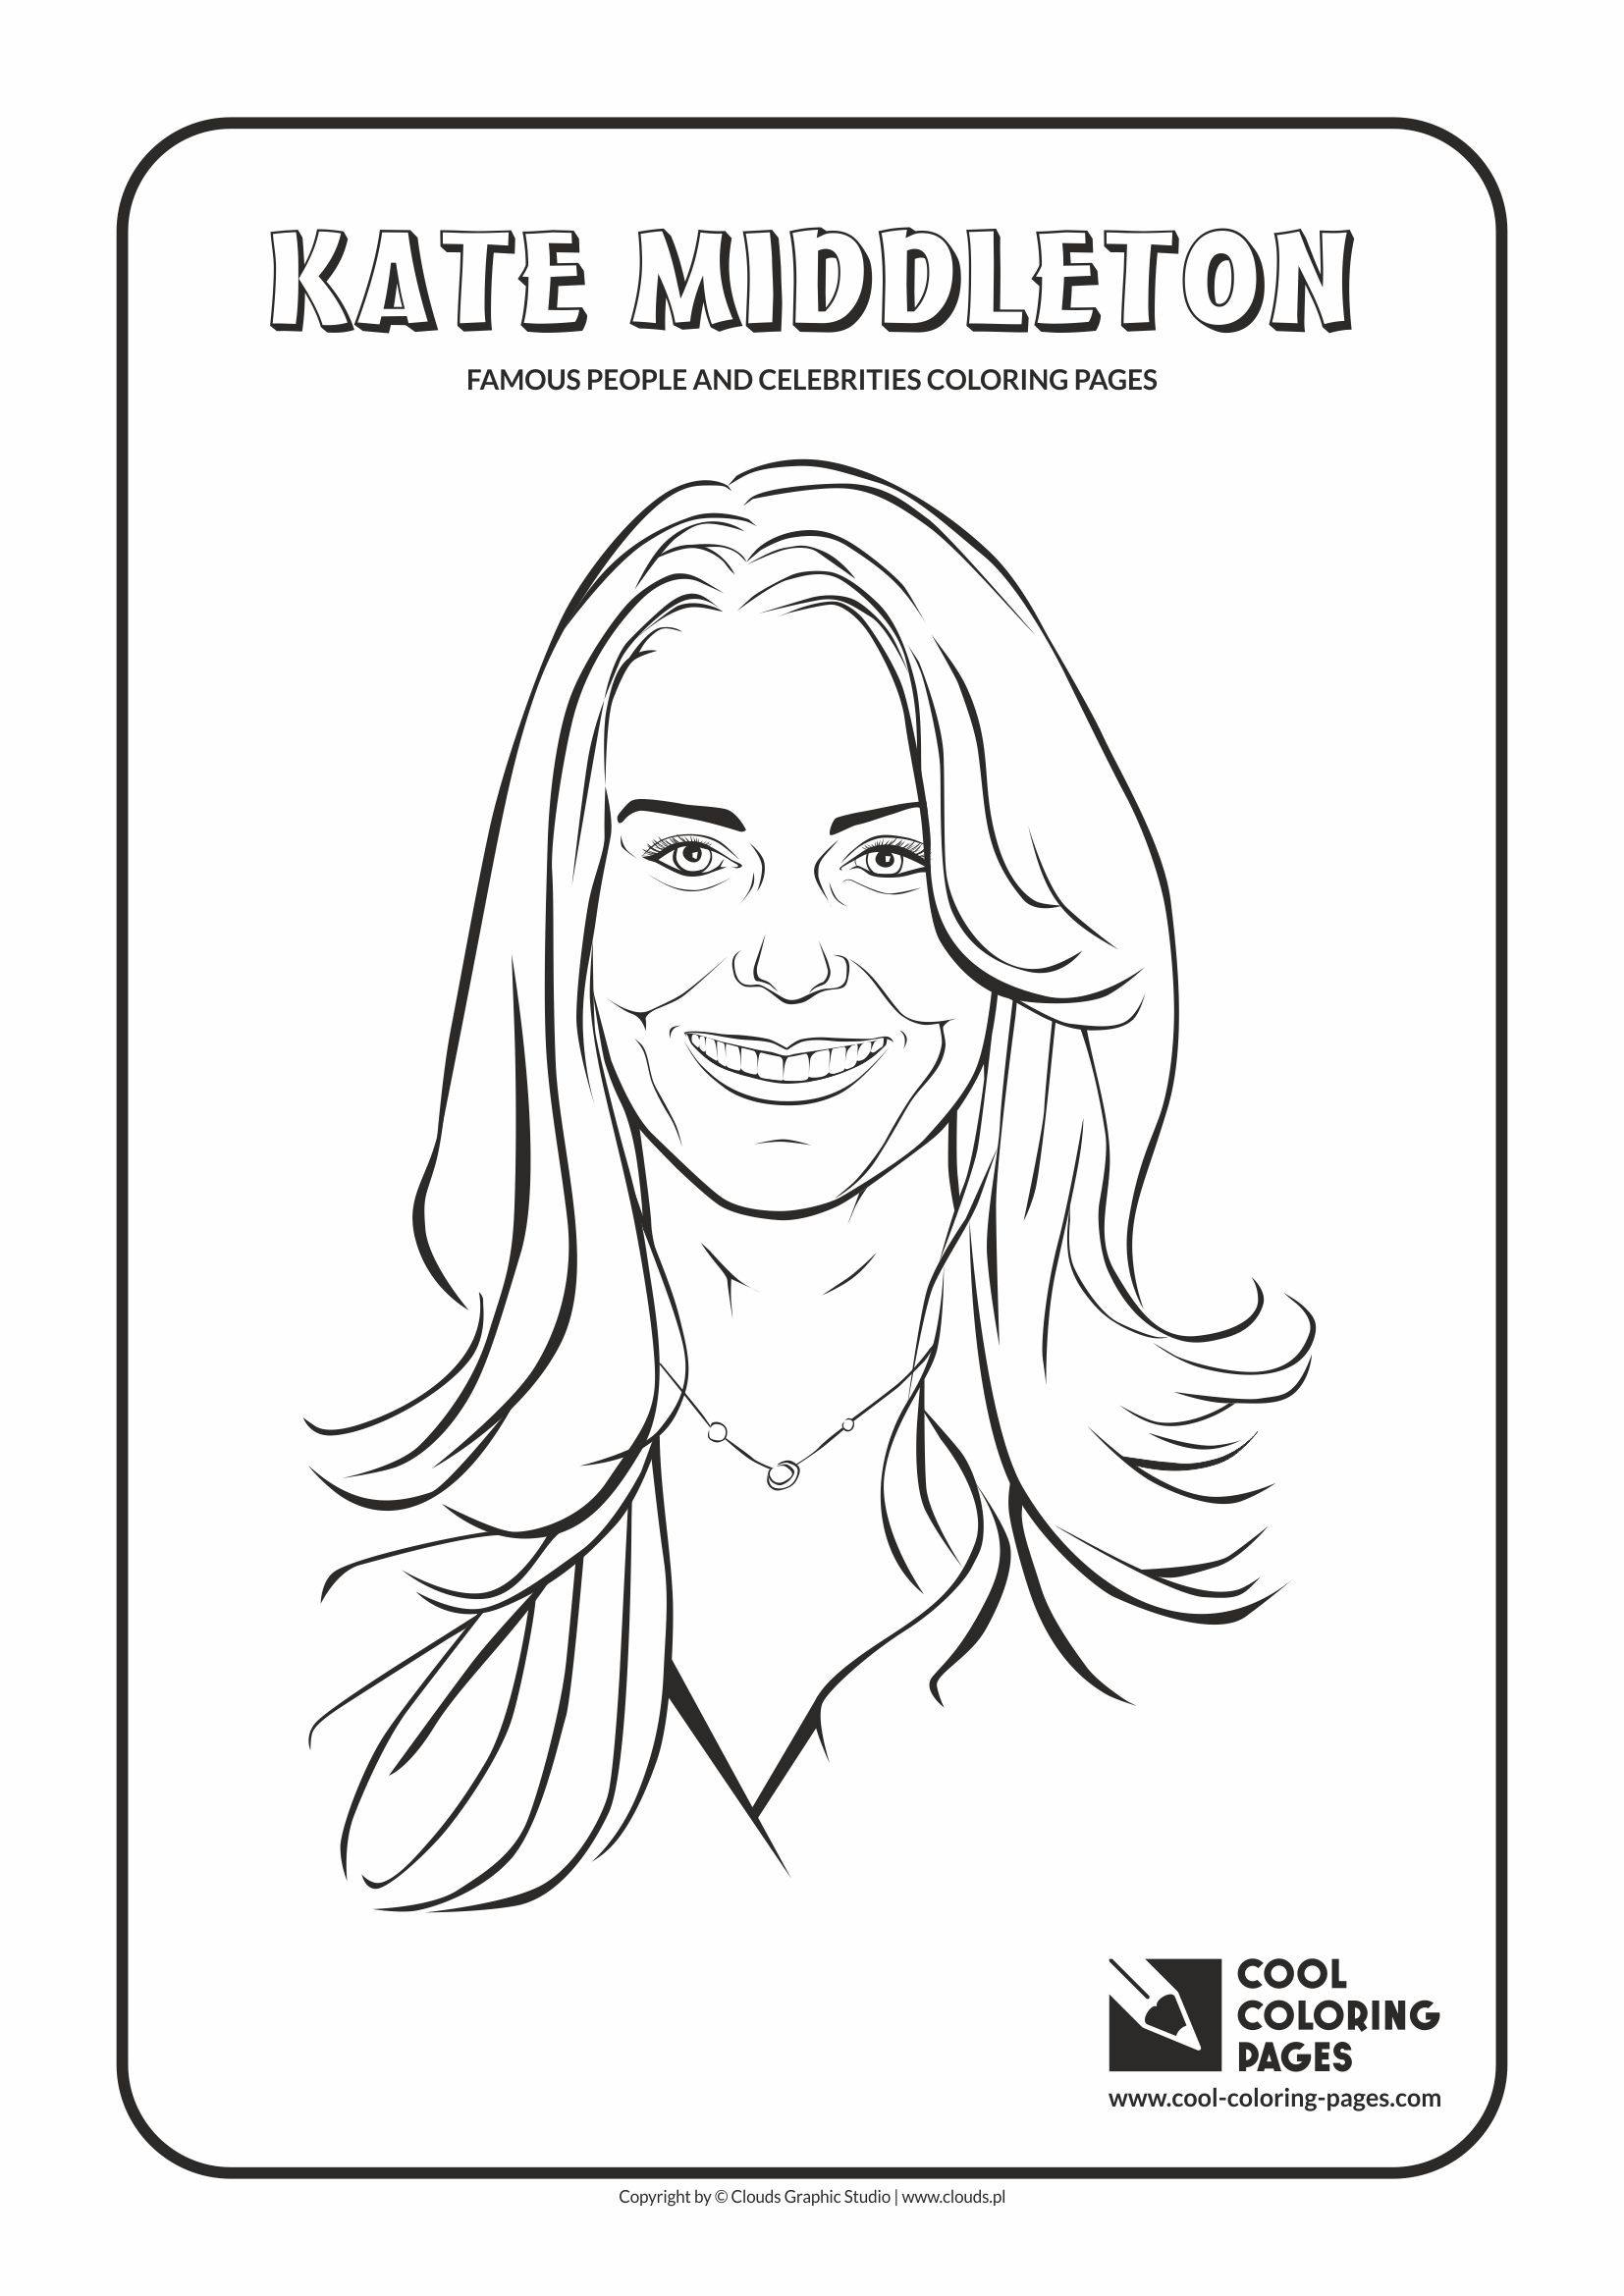 Cool Coloring Pages Famous people and celebrities - Cool Coloring Pages